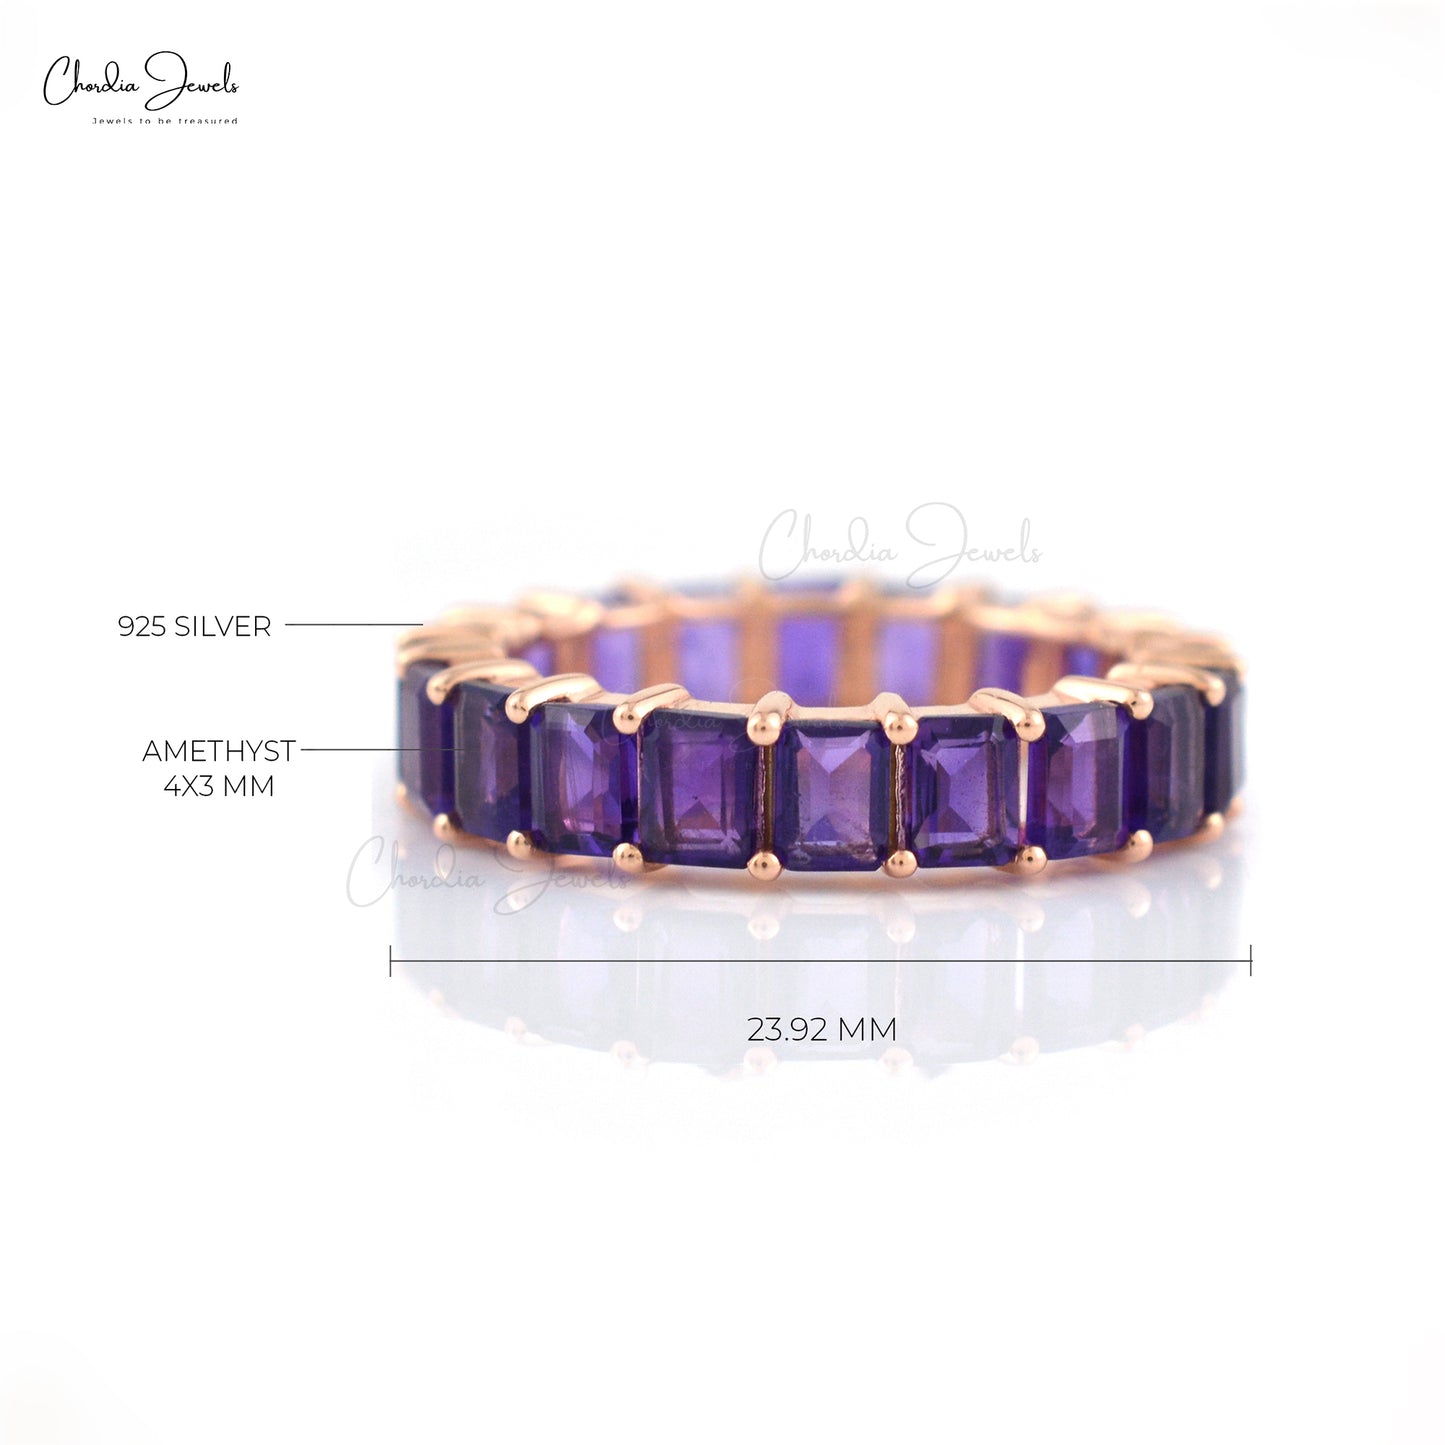 Full Eternity Amethyst Ring In 925 Sterling Silver Stacking Gemstone Jewelry From Trustable Supplier At Offer Price